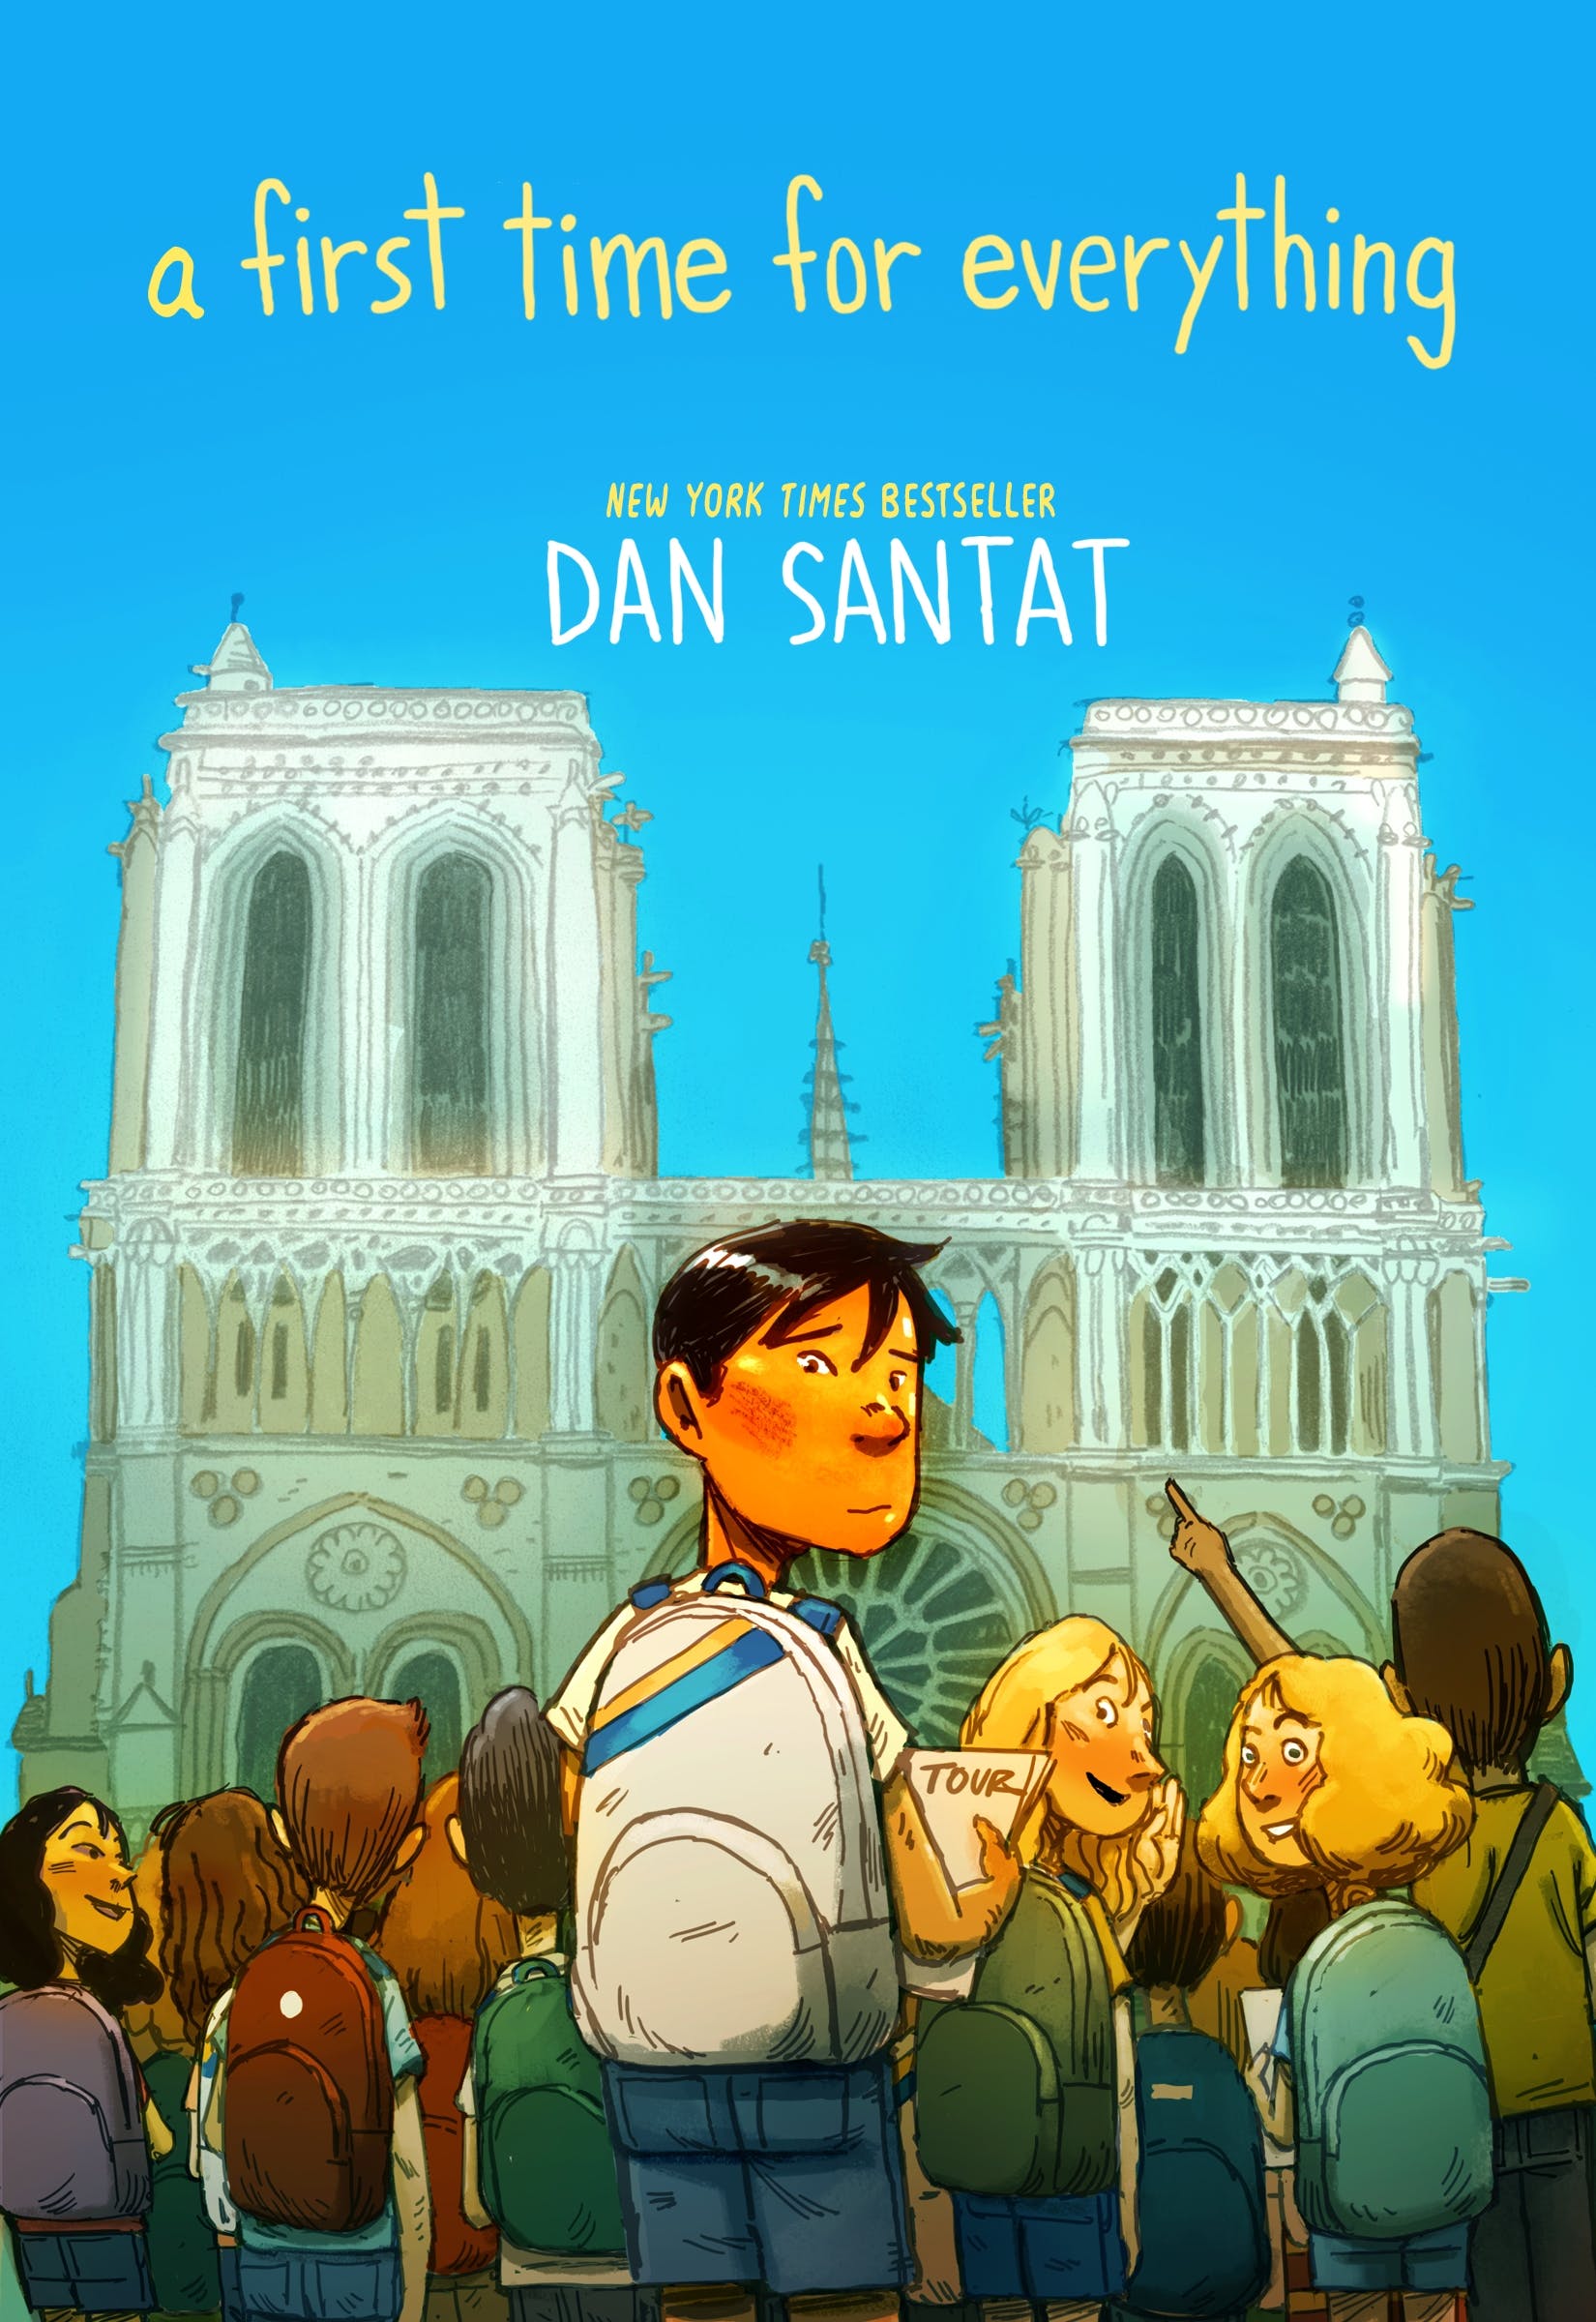 A First Time For Everything by Dan Santat